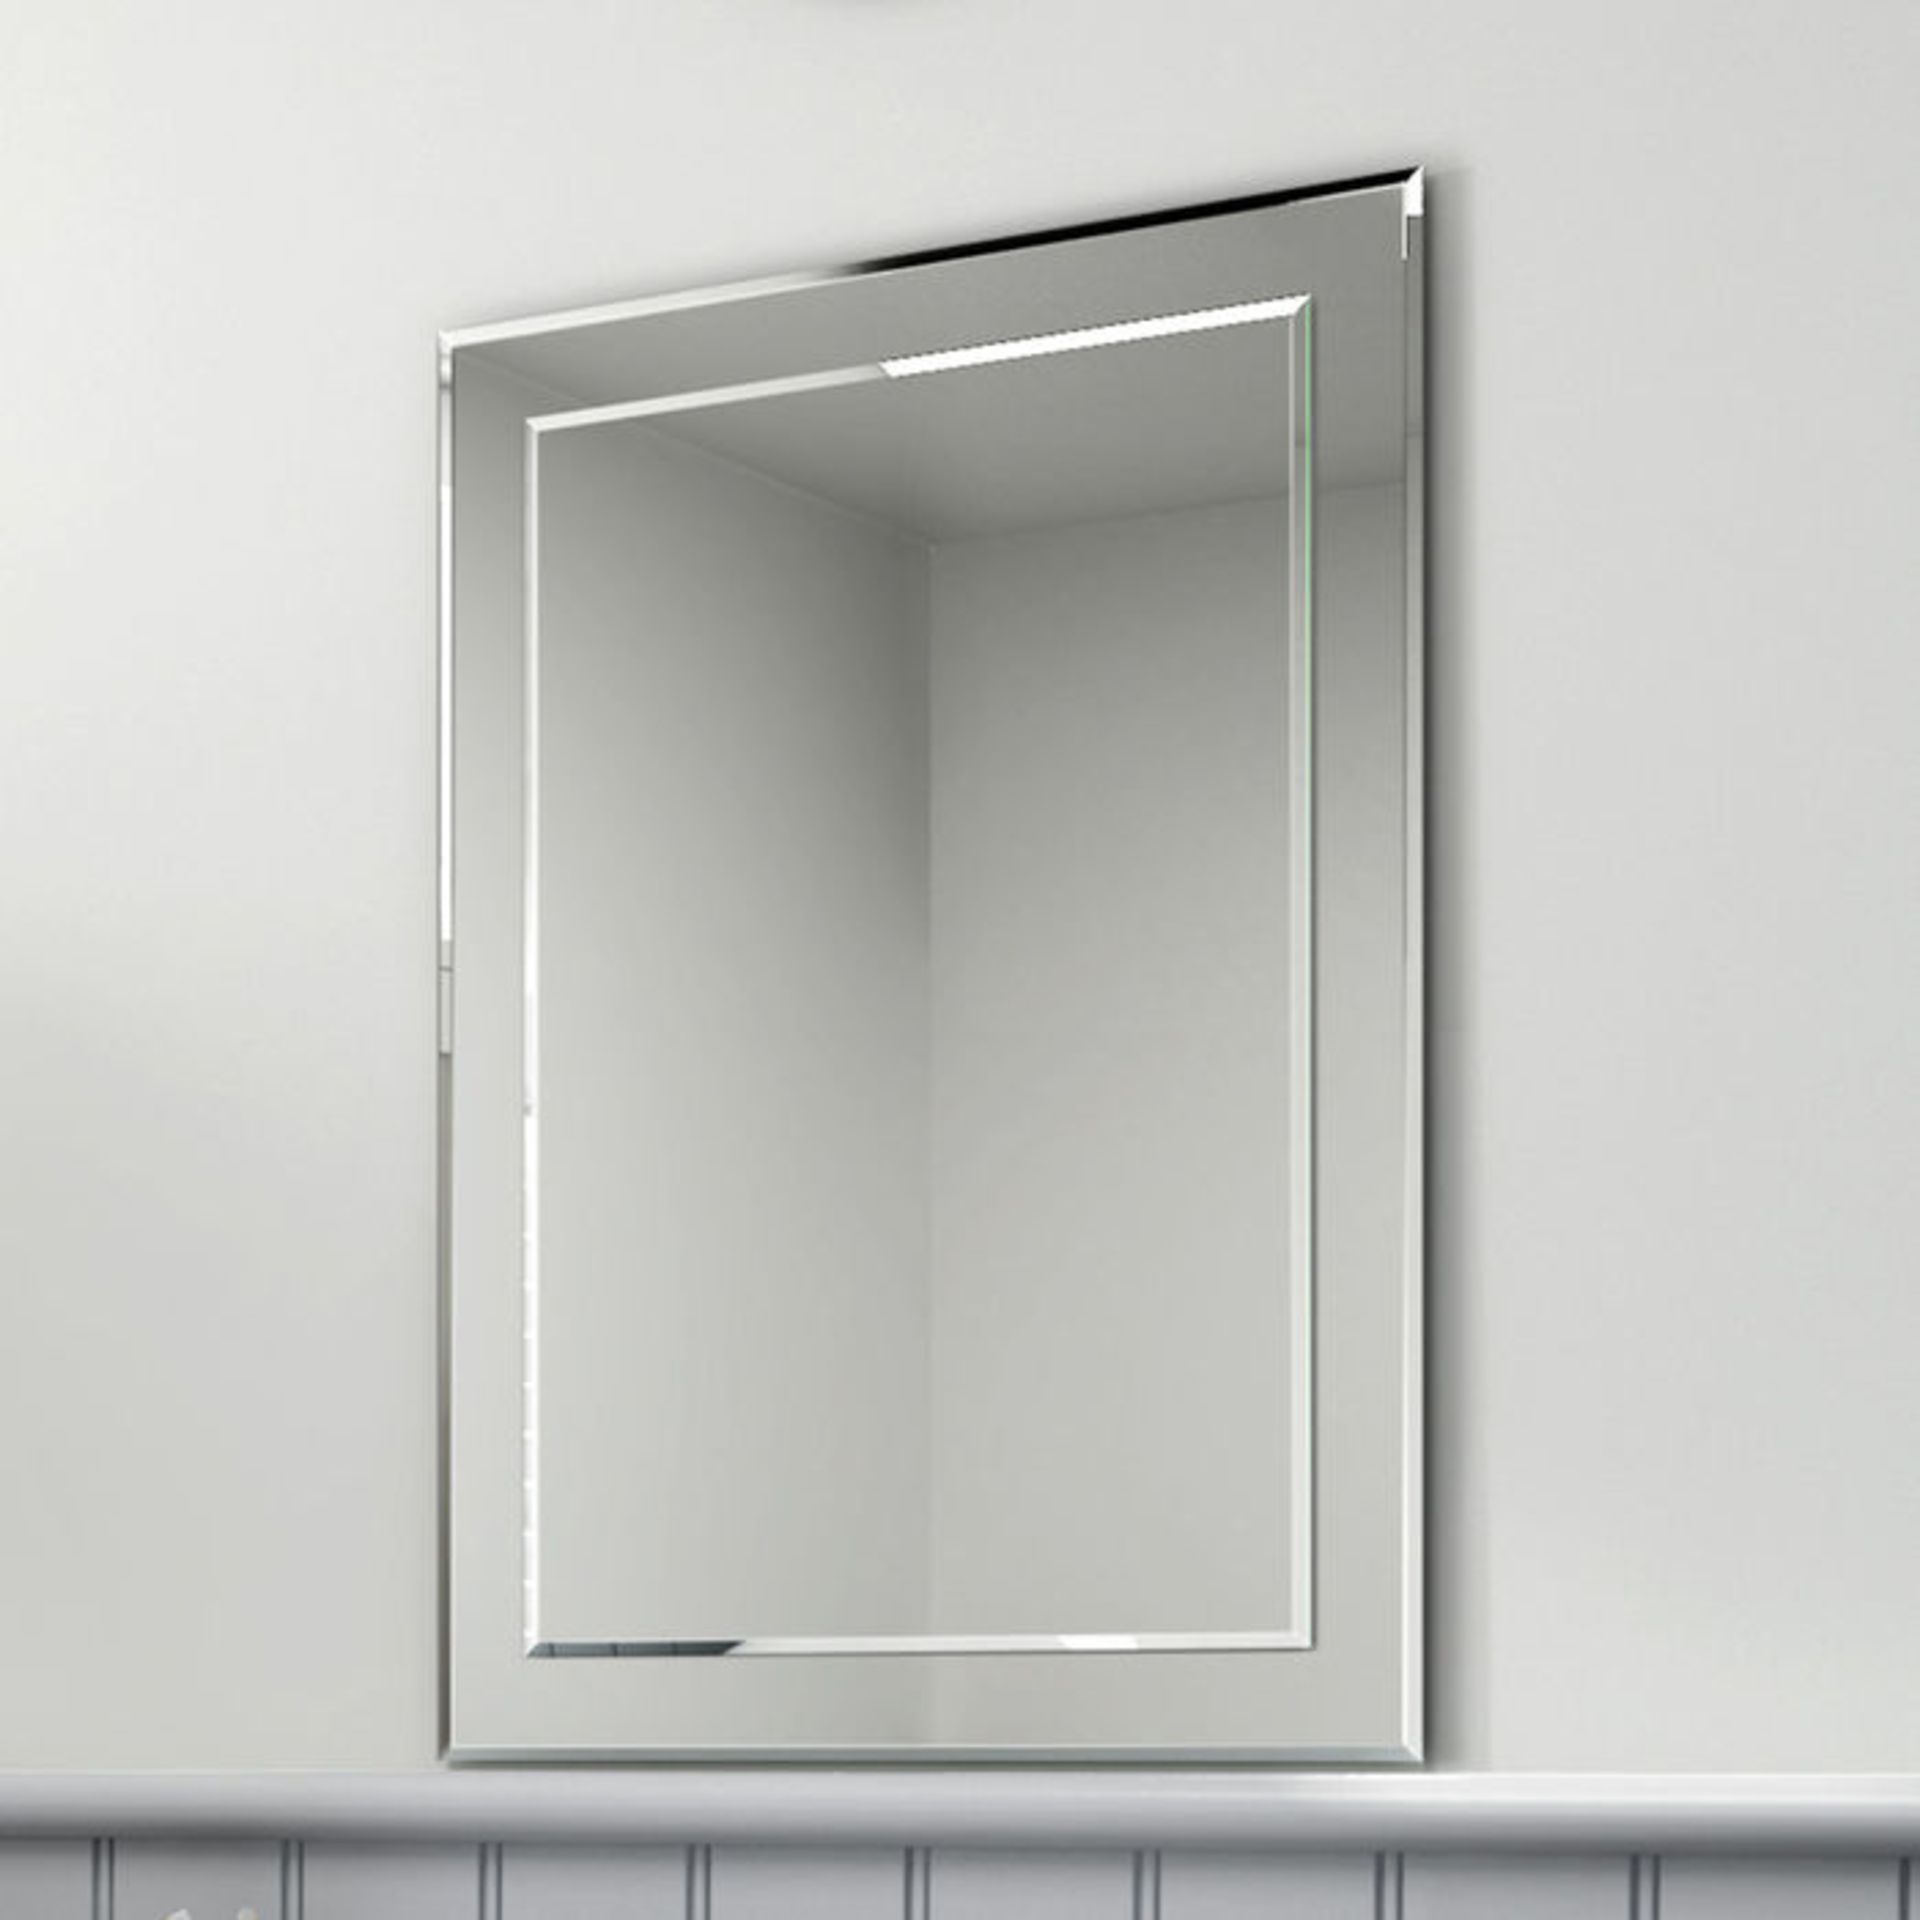 (GR184) 500x700mm Bevel Mirror. Smooth beveled edge for additional safety and style Supplied fully